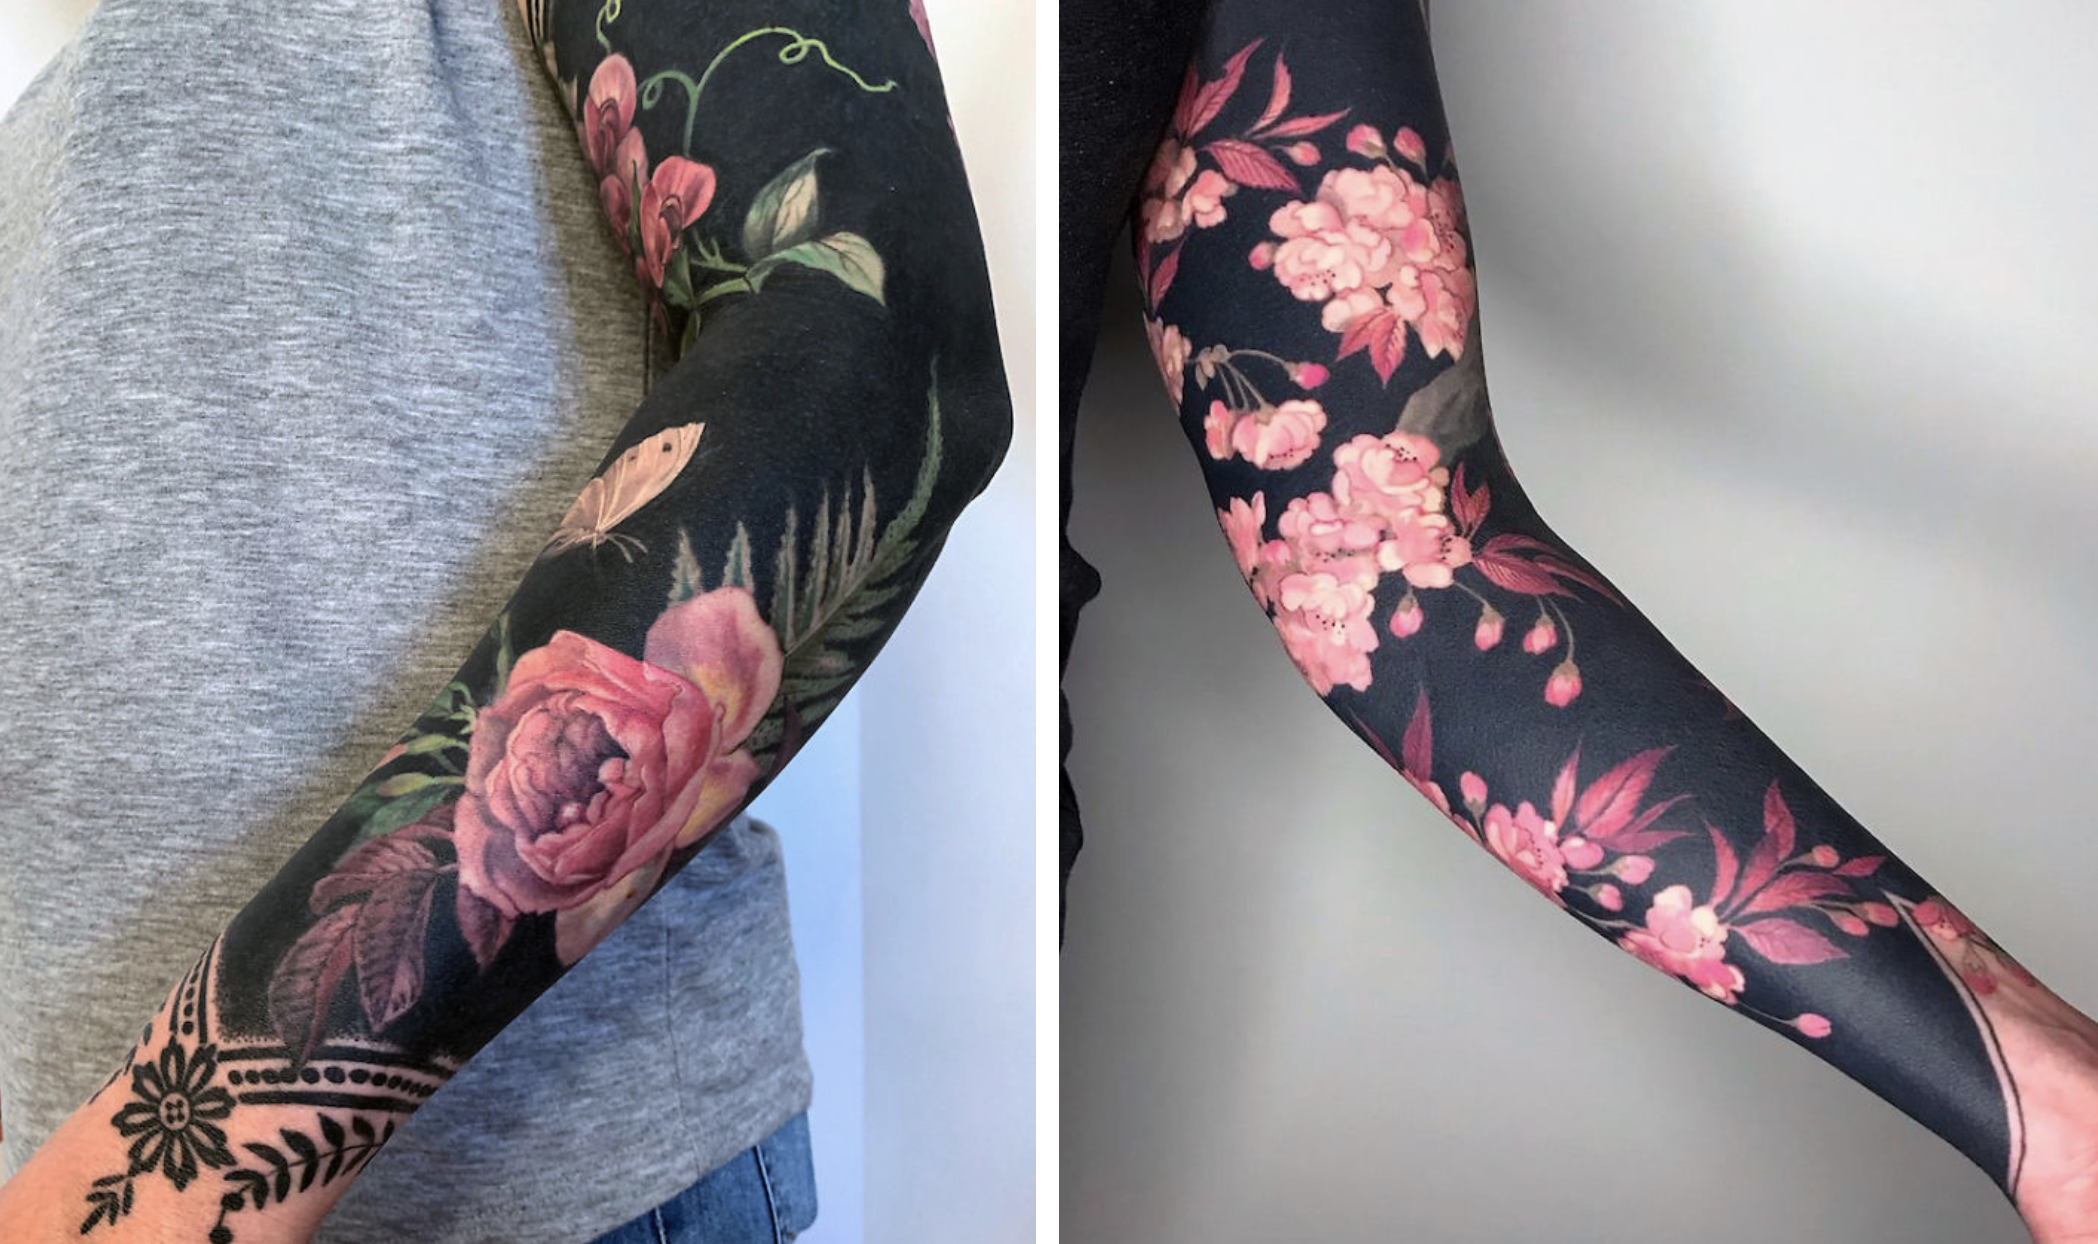 7. White ink blackout tattoos: Tips for choosing a design - wide 5